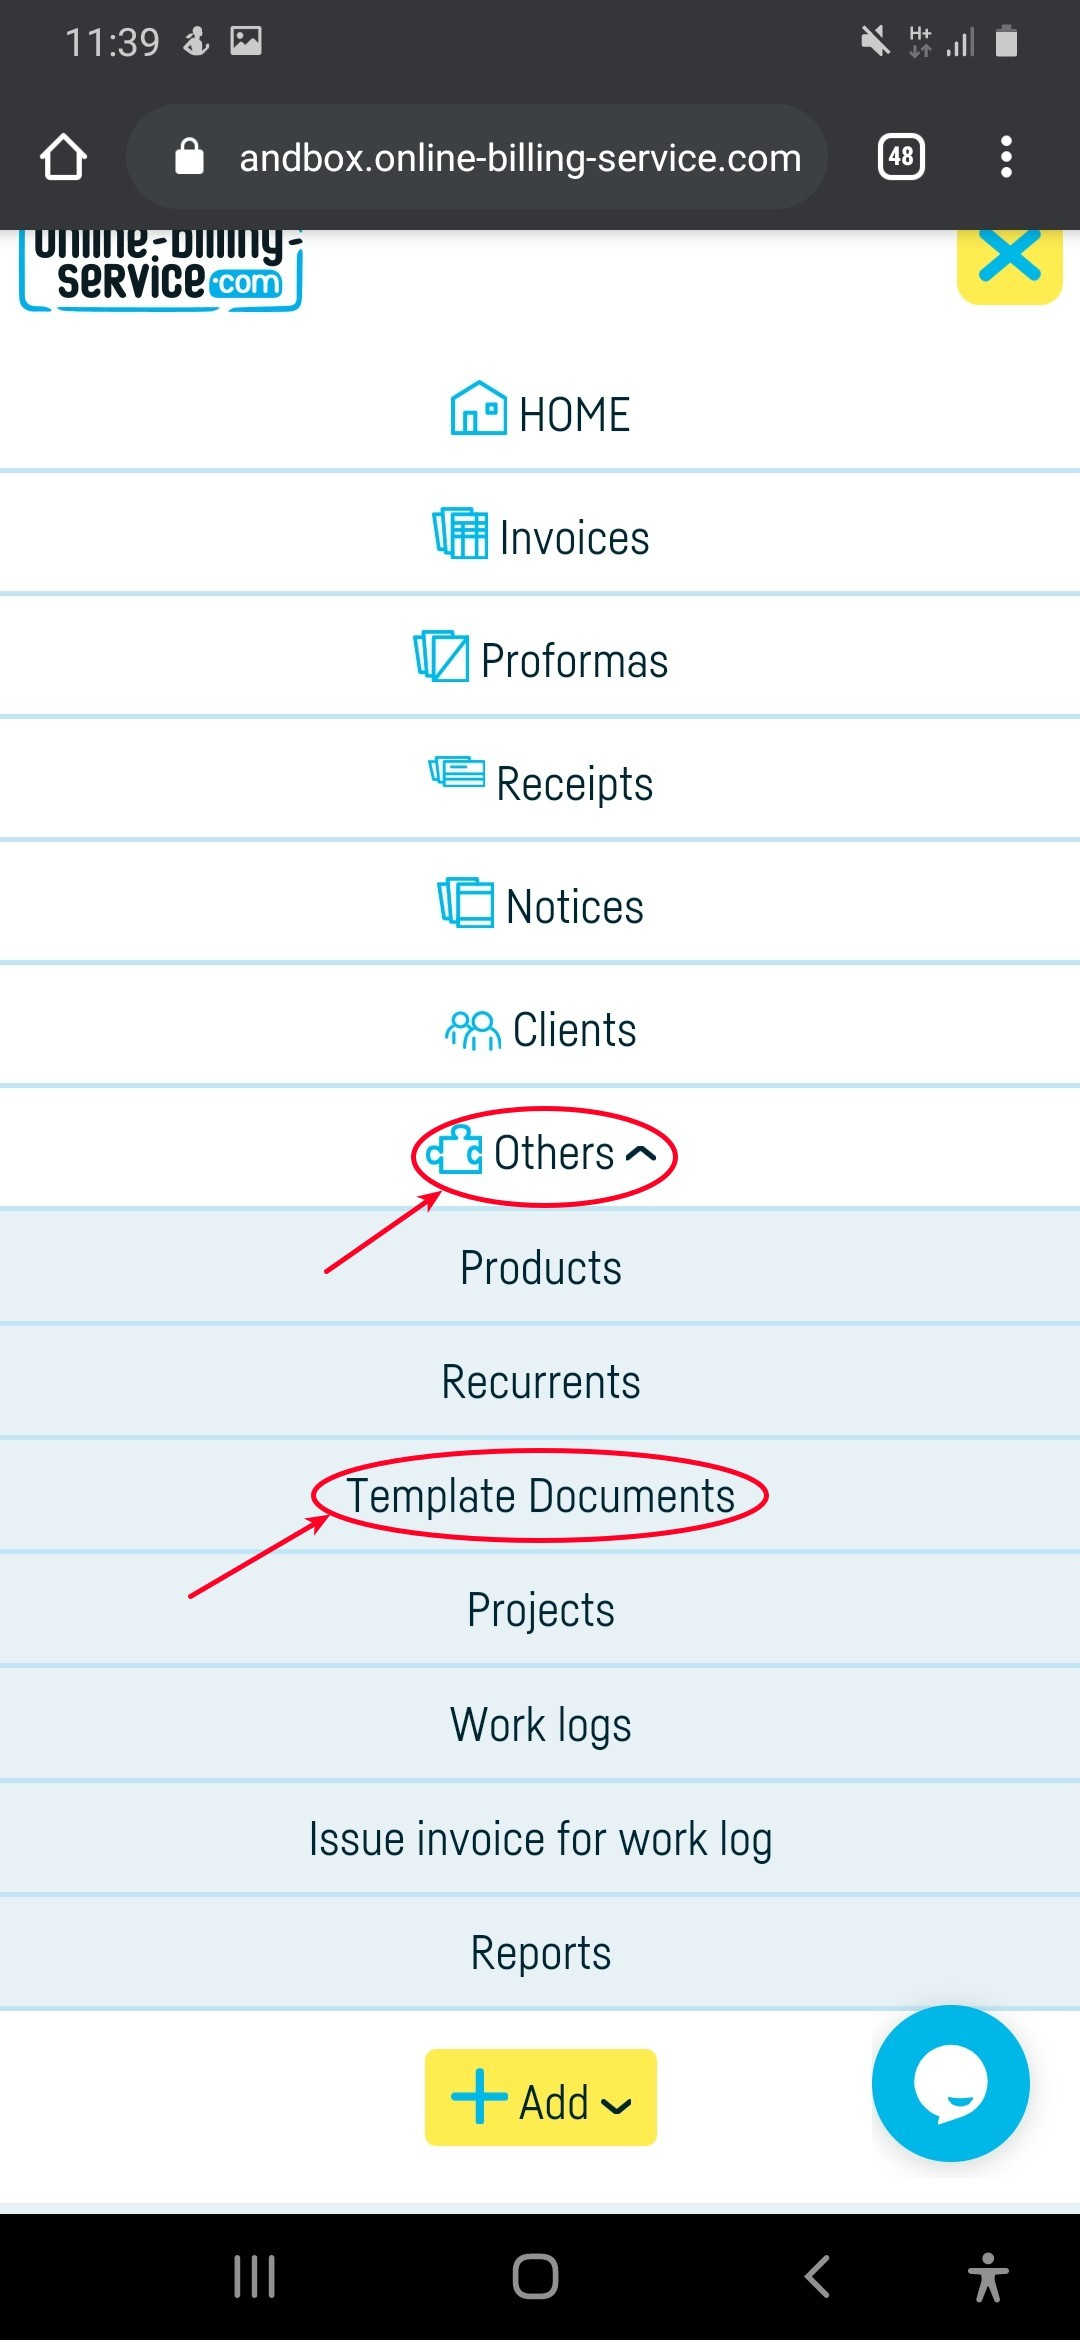 Generate a document from a standard document template - step 1